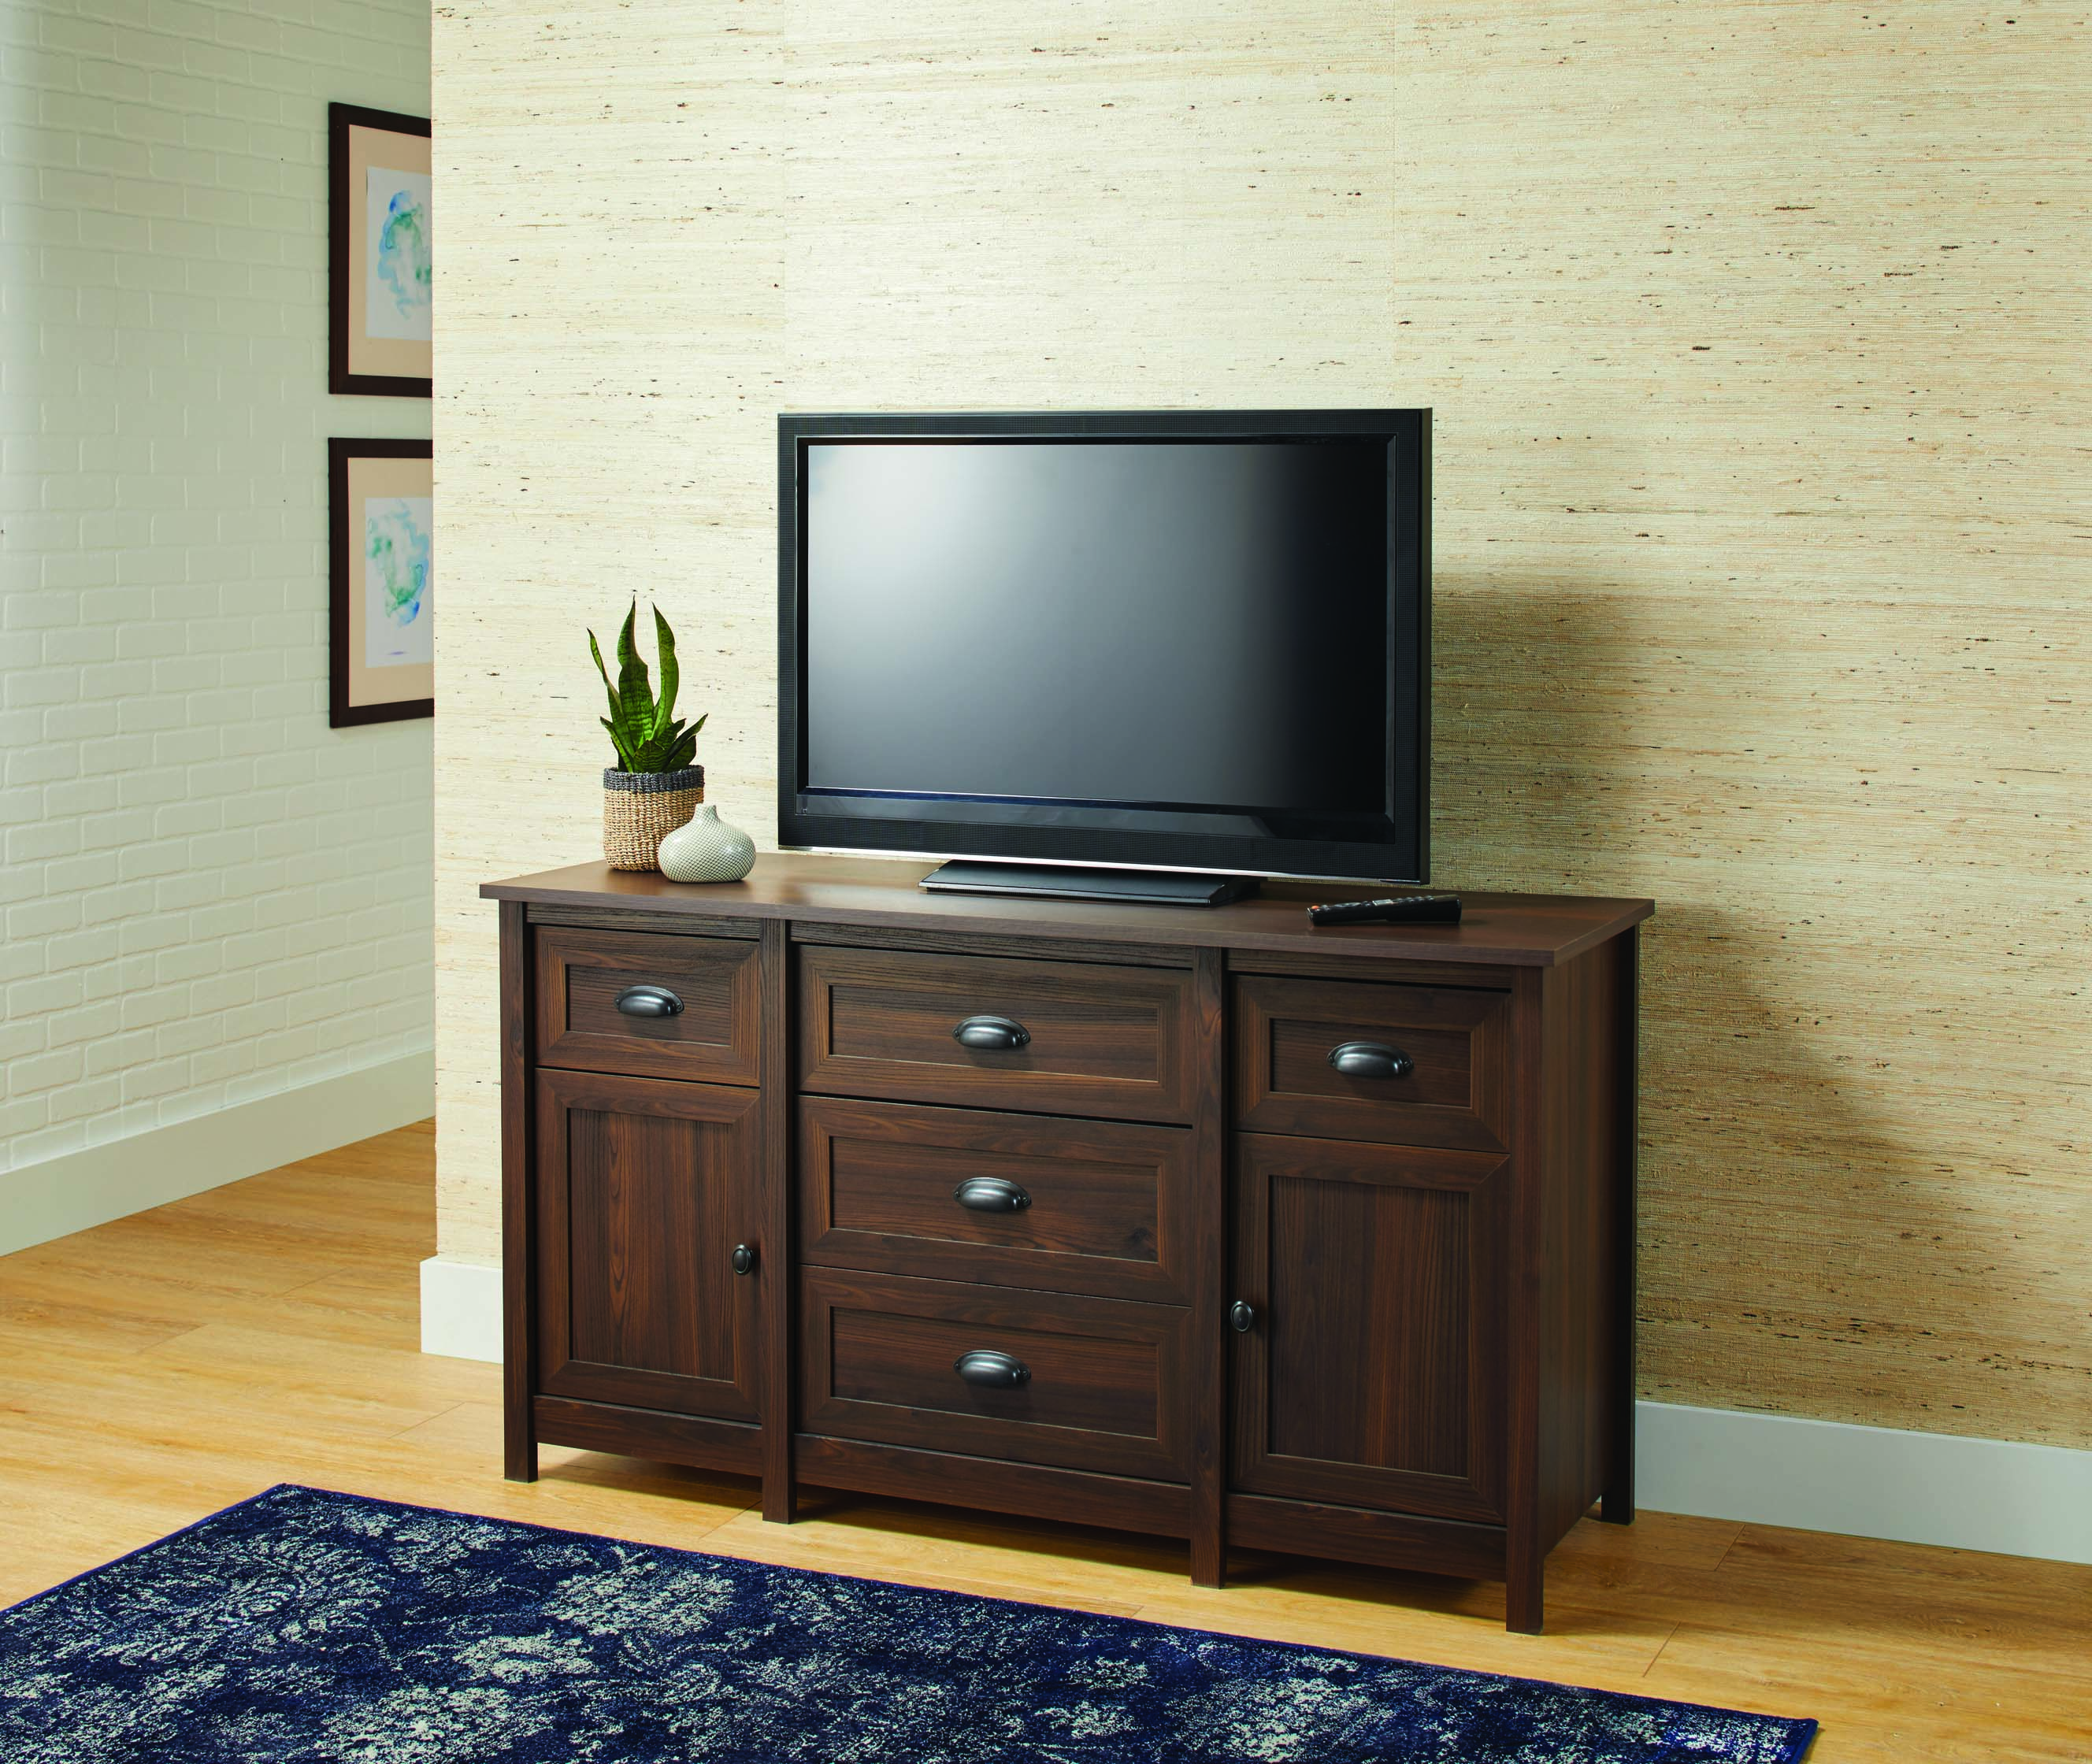 Better Homes & Gardens Lafayette TV Stand, for TVs up to 50", English Walnut Finish - image 2 of 10